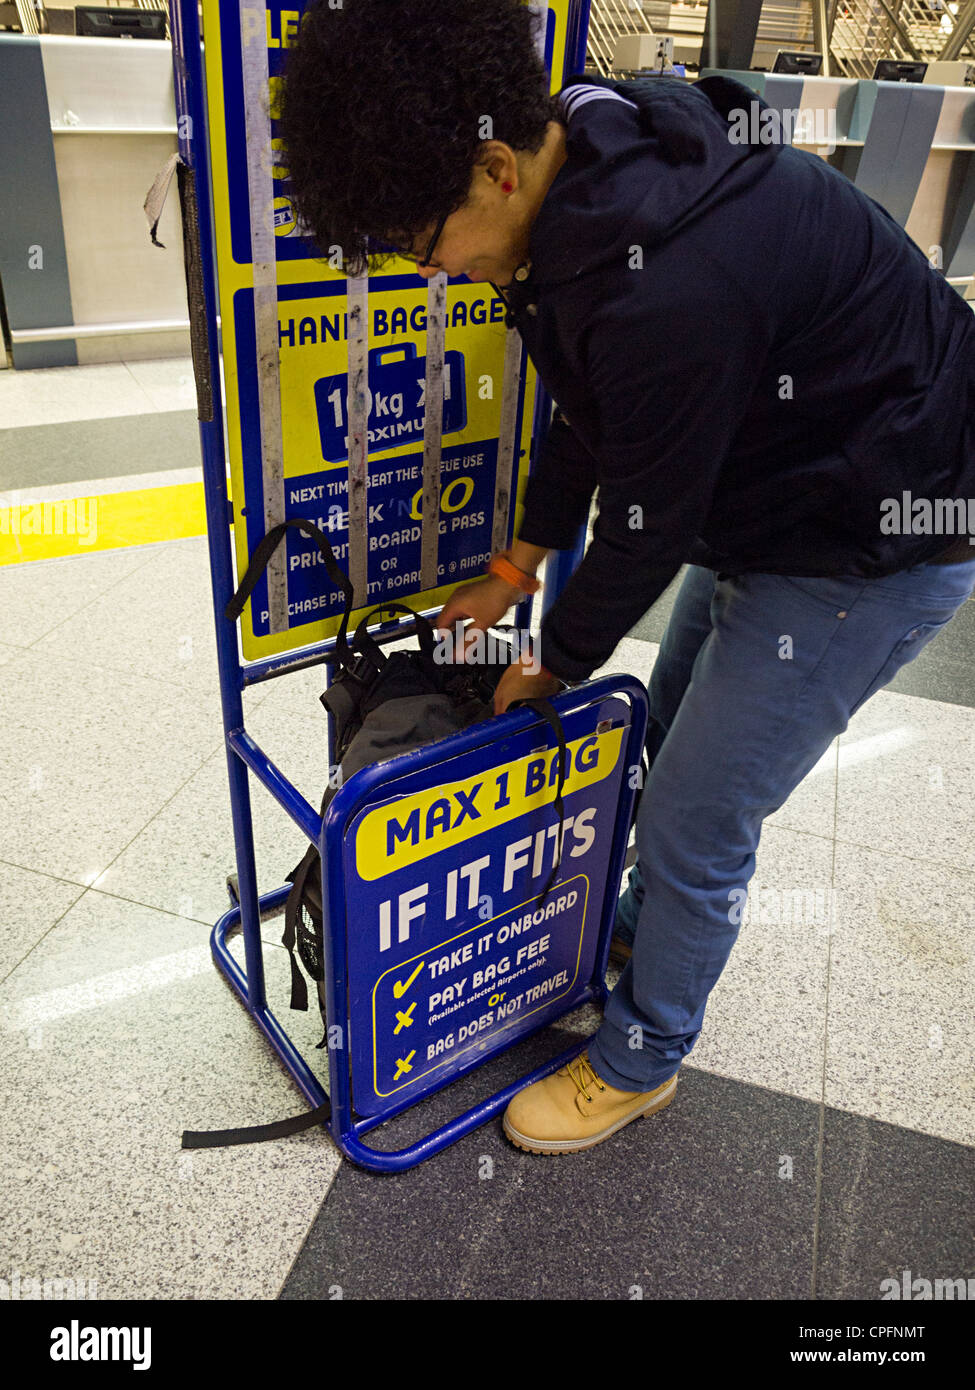 Ryanair Bags High Resolution Stock Photography and Images - Alamy